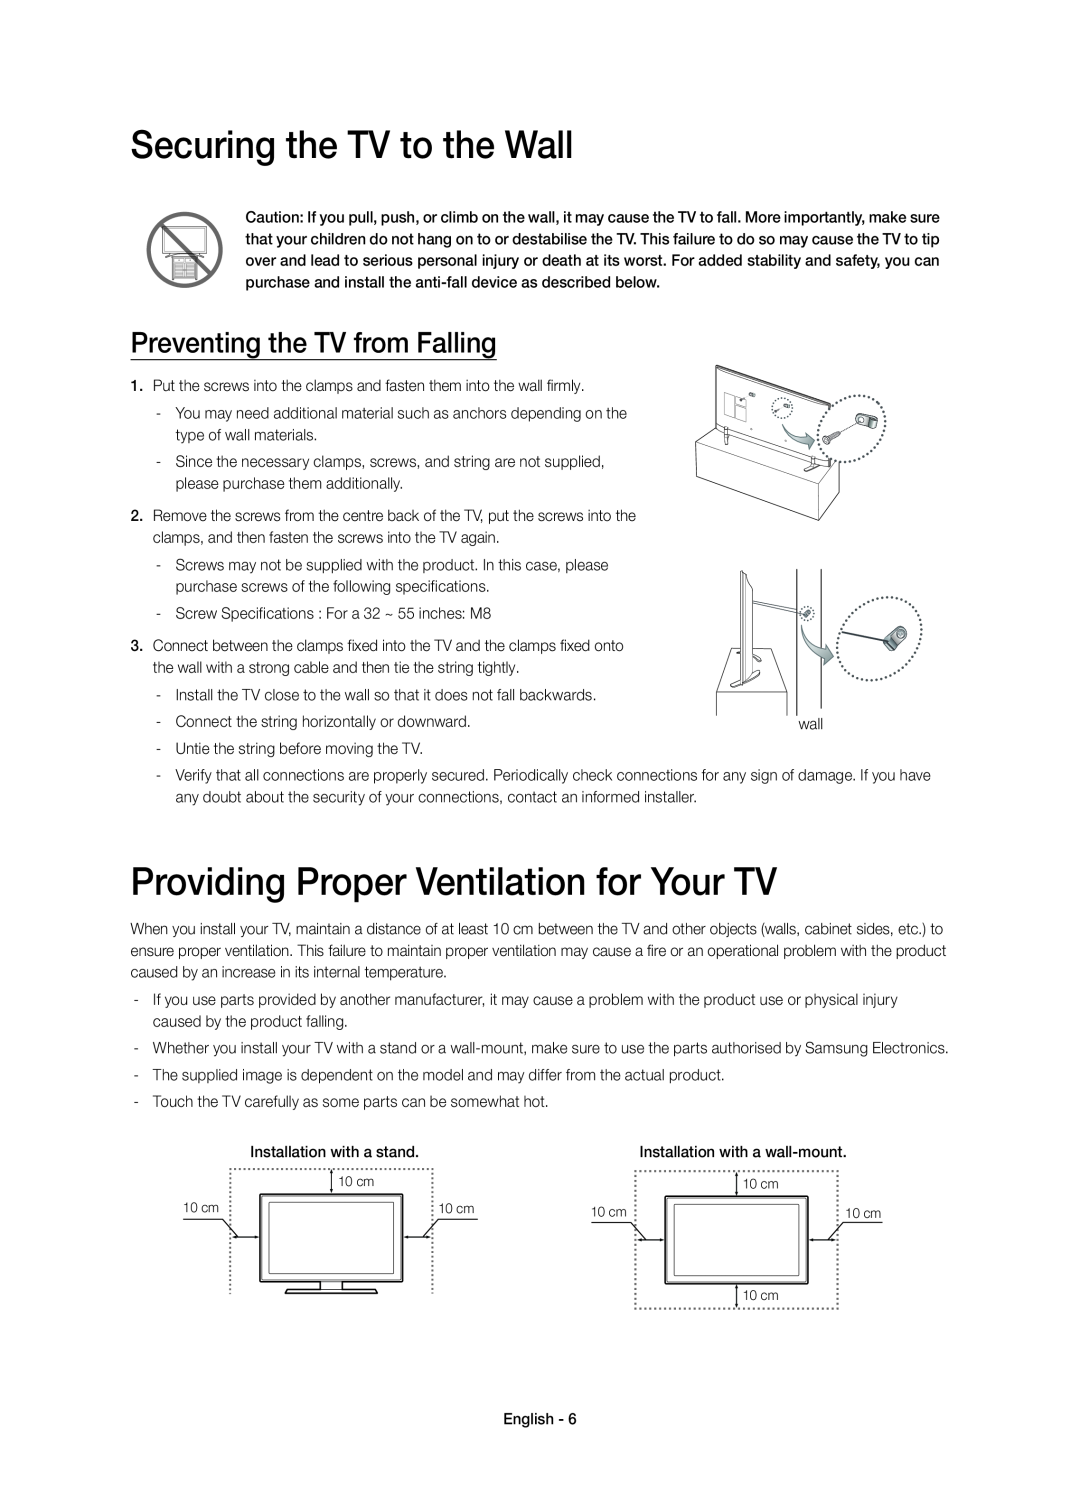 Samsung UE48H6410SSXXH, UE55H6410SSXXH manual Securing the TV to the Wall, Providing Proper Ventilation for Your TV 